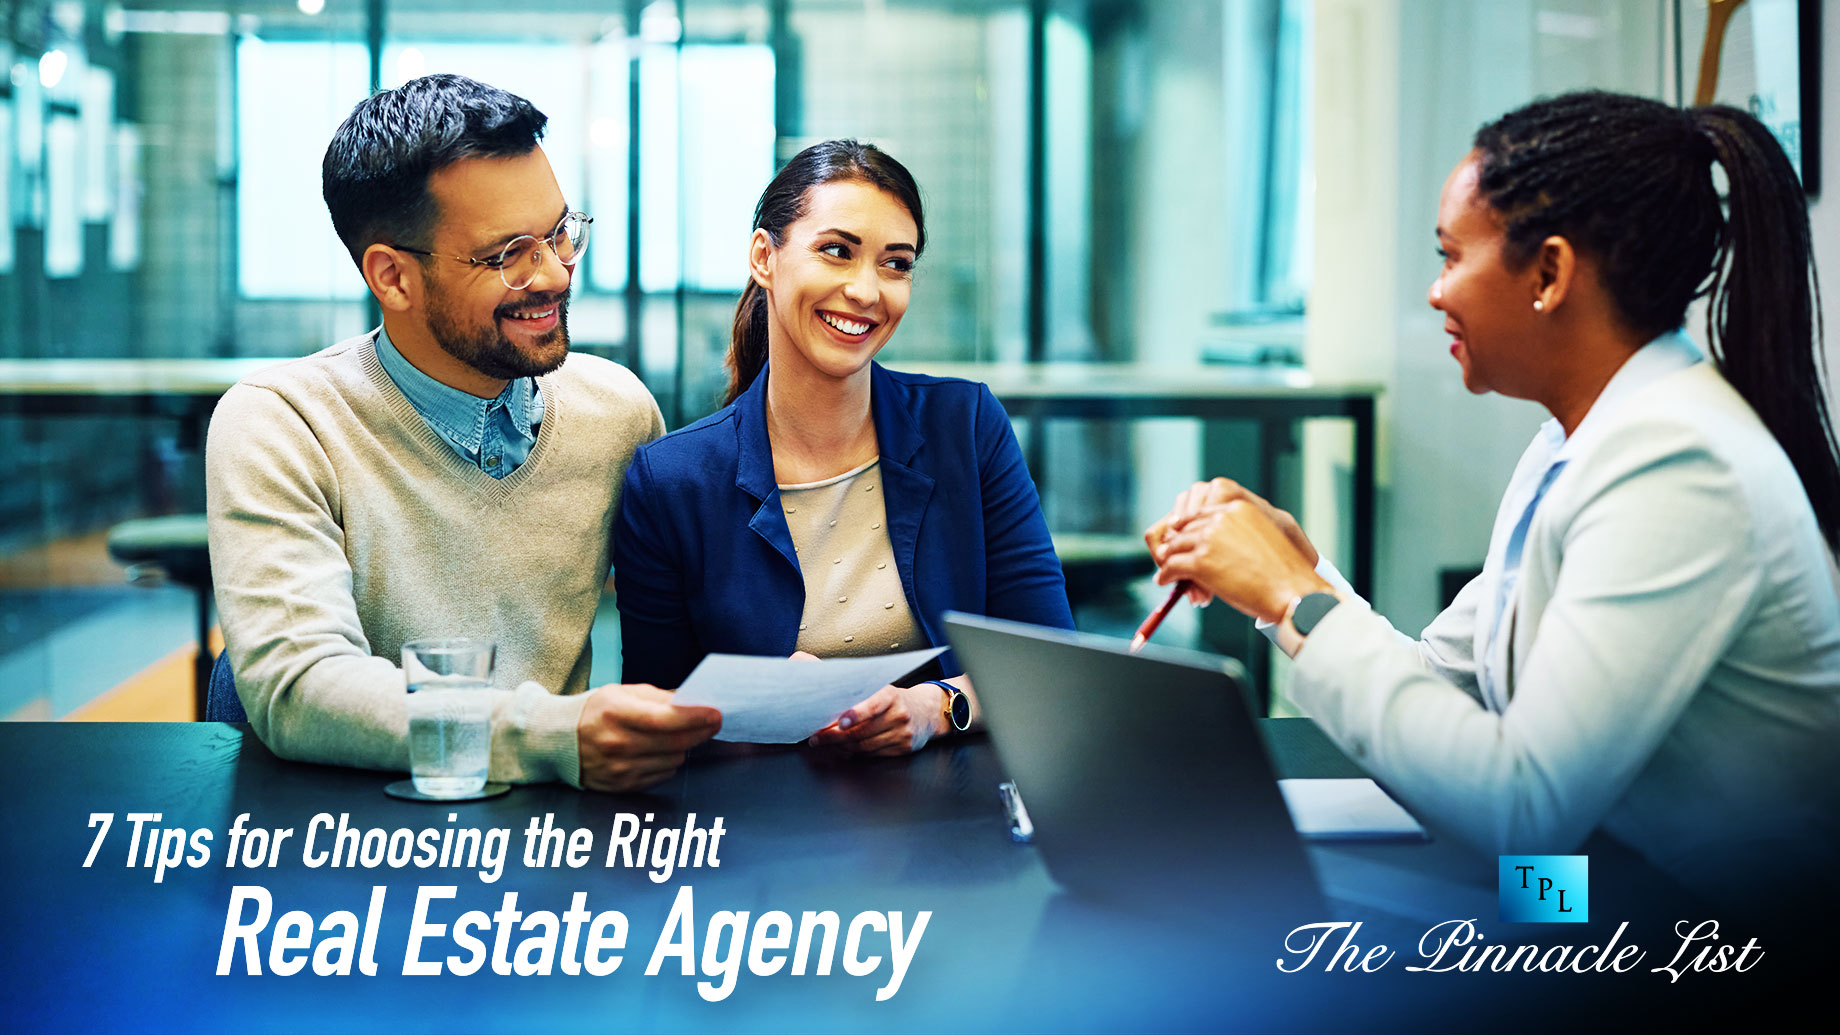 7 Tips for Choosing the Right Real Estate Agency